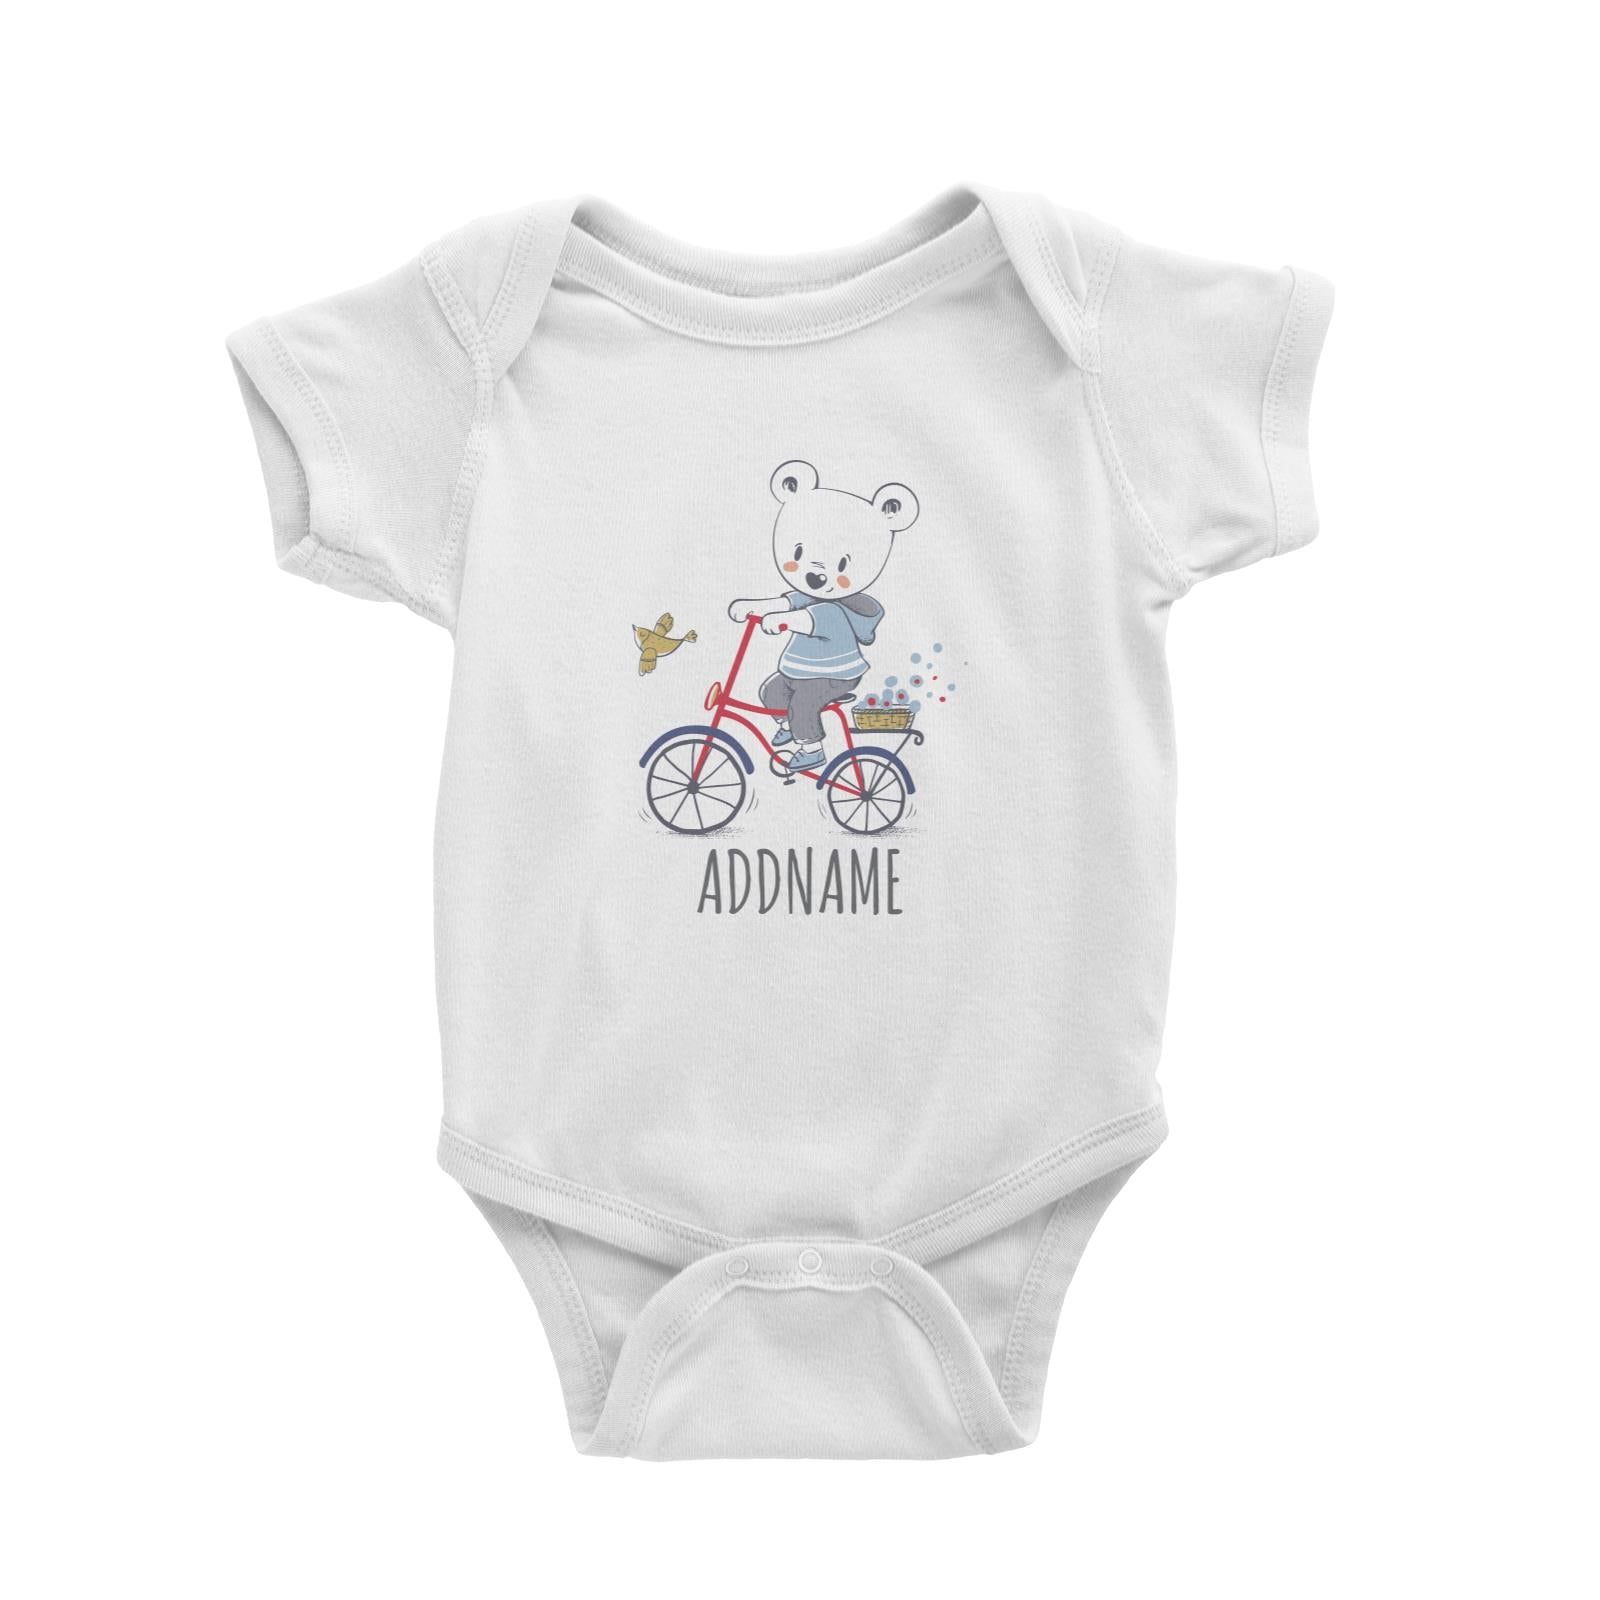 Bear on Bicycle White Baby Romper Personalizable Designs Cute Sweet Animal For Boys HG